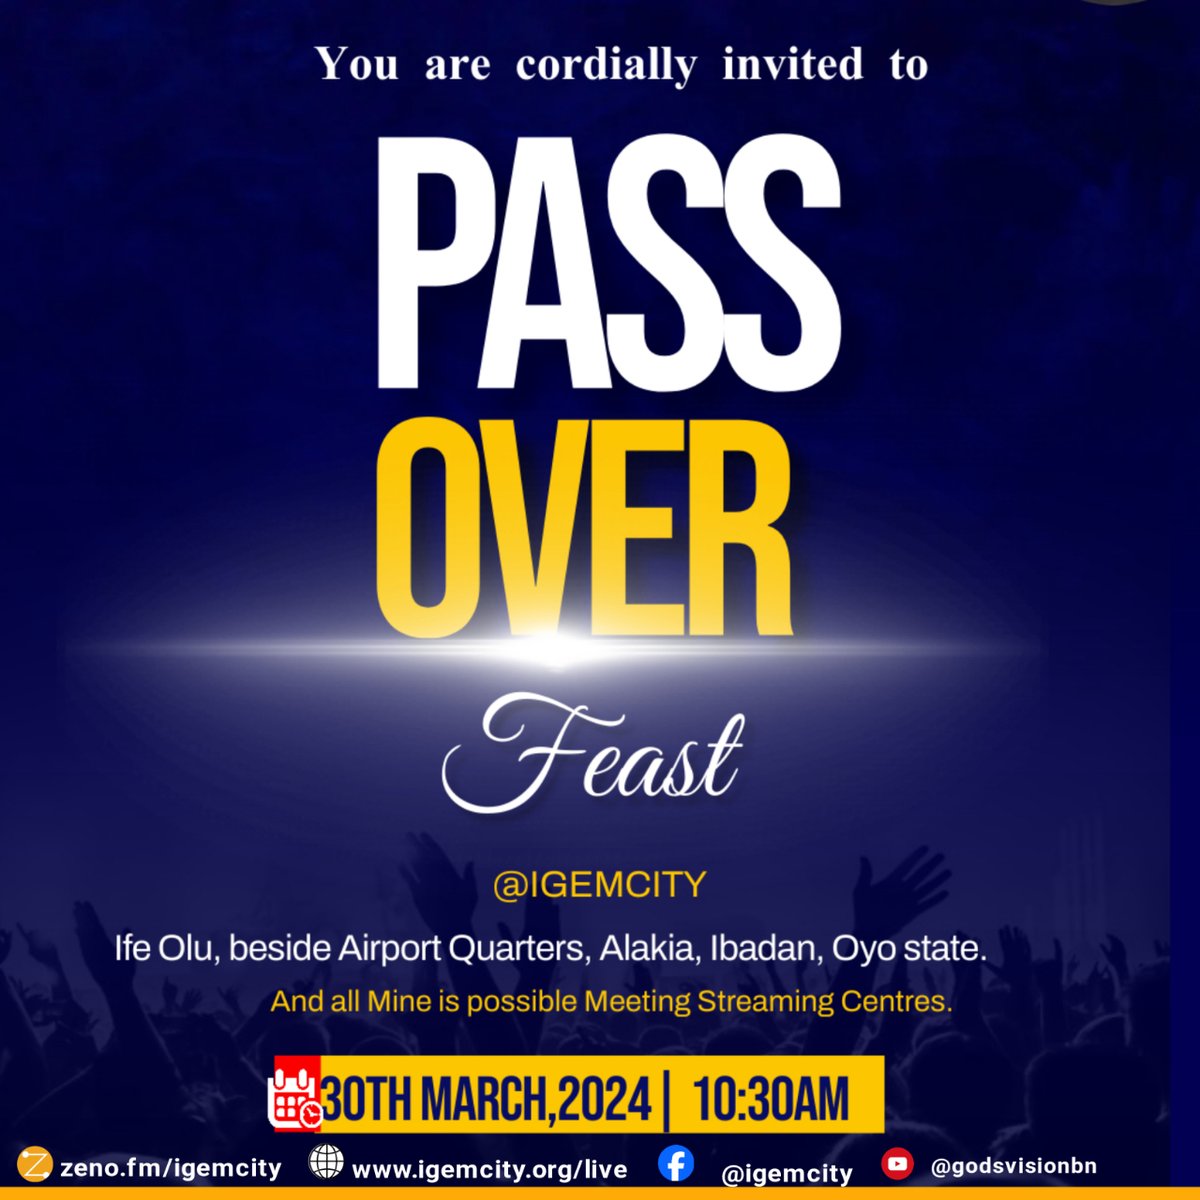 The Feast of Passover continues today! Be prepared to meet with God. Come and be blessed both physically and spiritually. #igem #passoverfeast #Jesus #holycommunion #bloodofjesus #bodyofjesus #deliverance #salvation